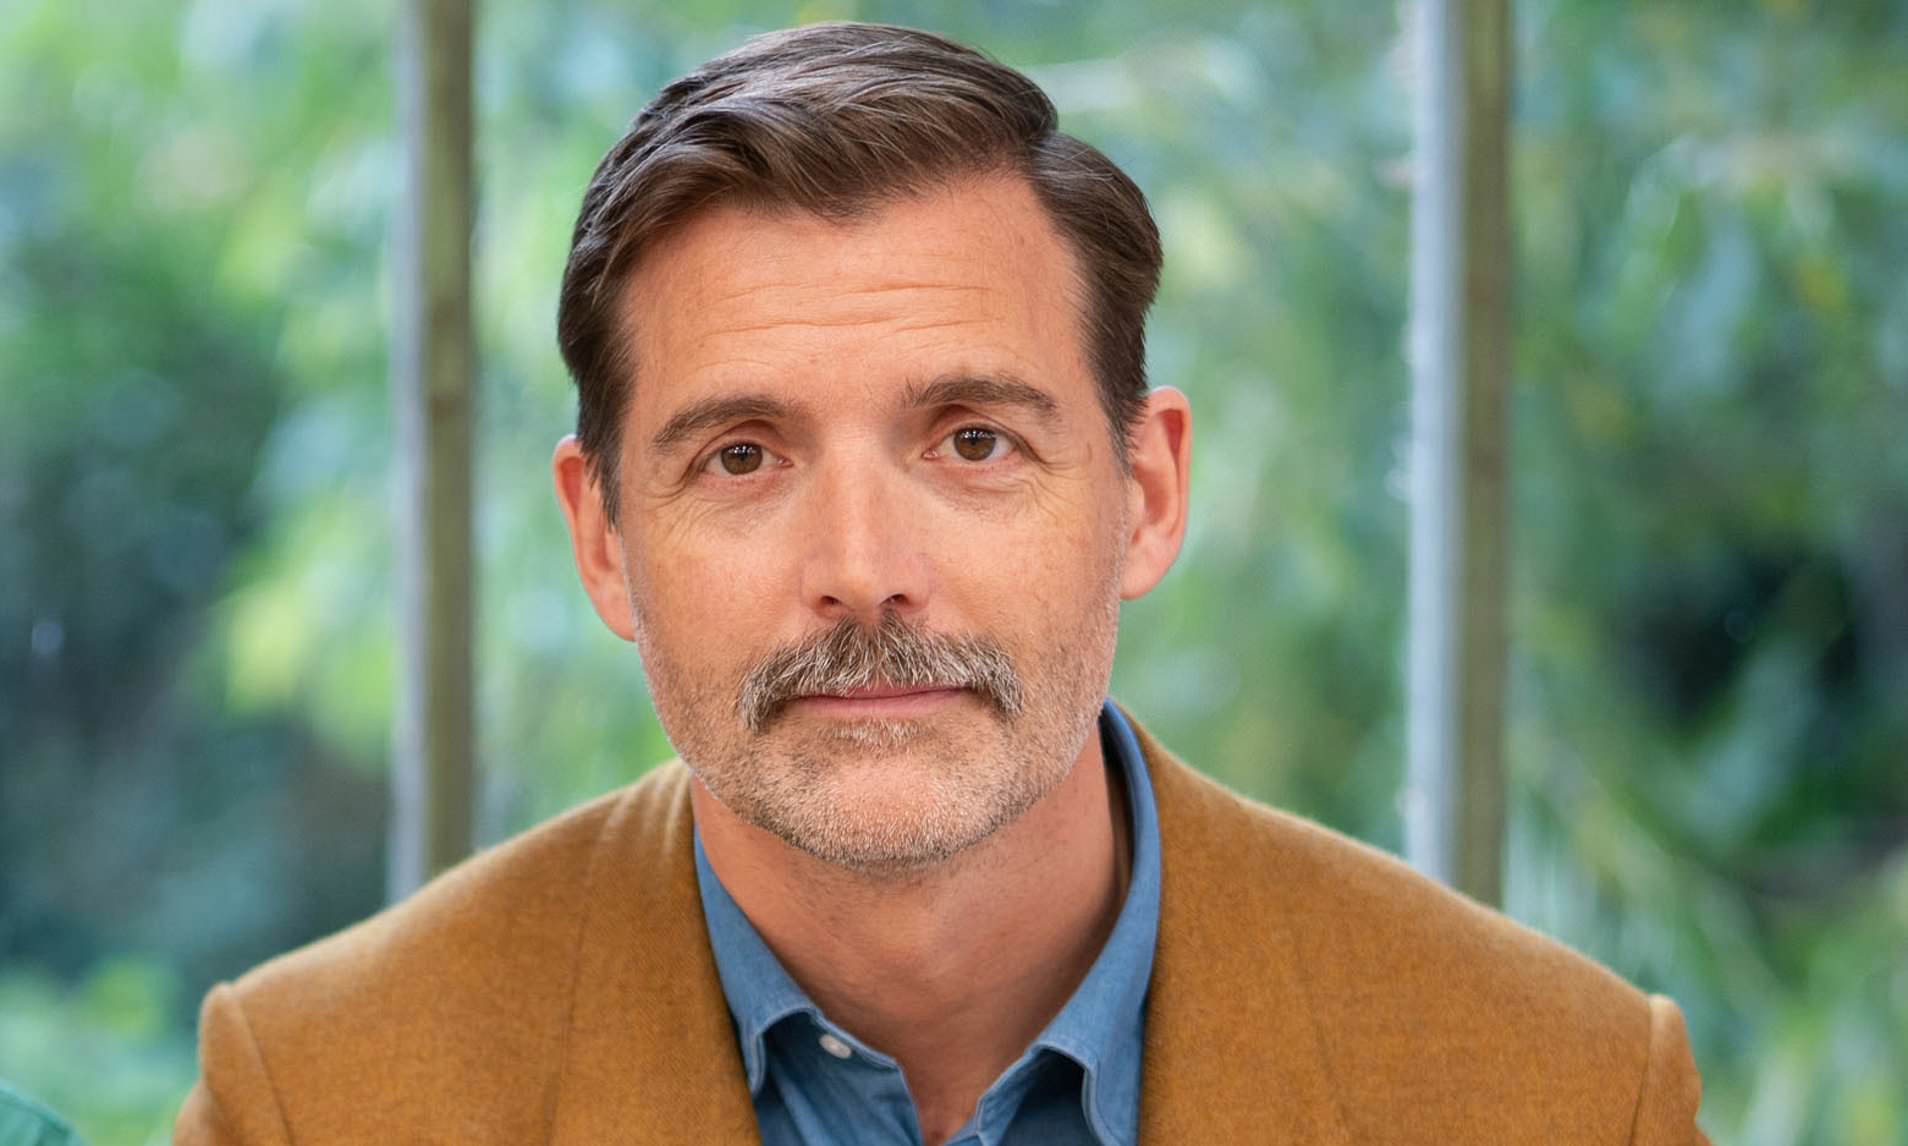 Patrick Grant shares the anger he felt over his father's Covid death